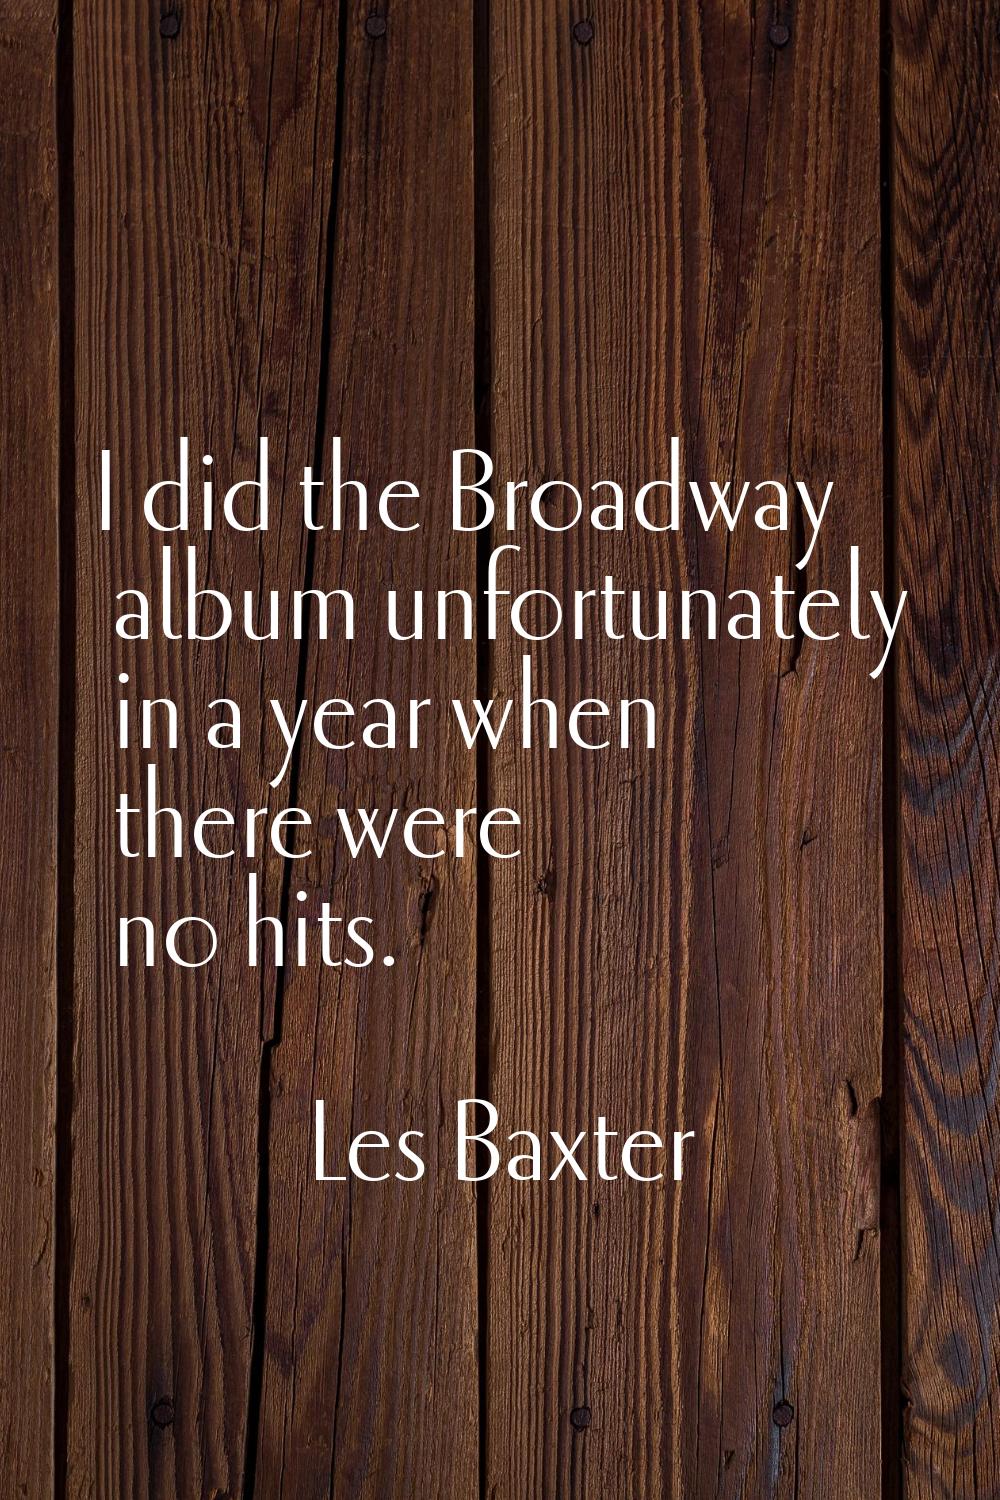 I did the Broadway album unfortunately in a year when there were no hits.